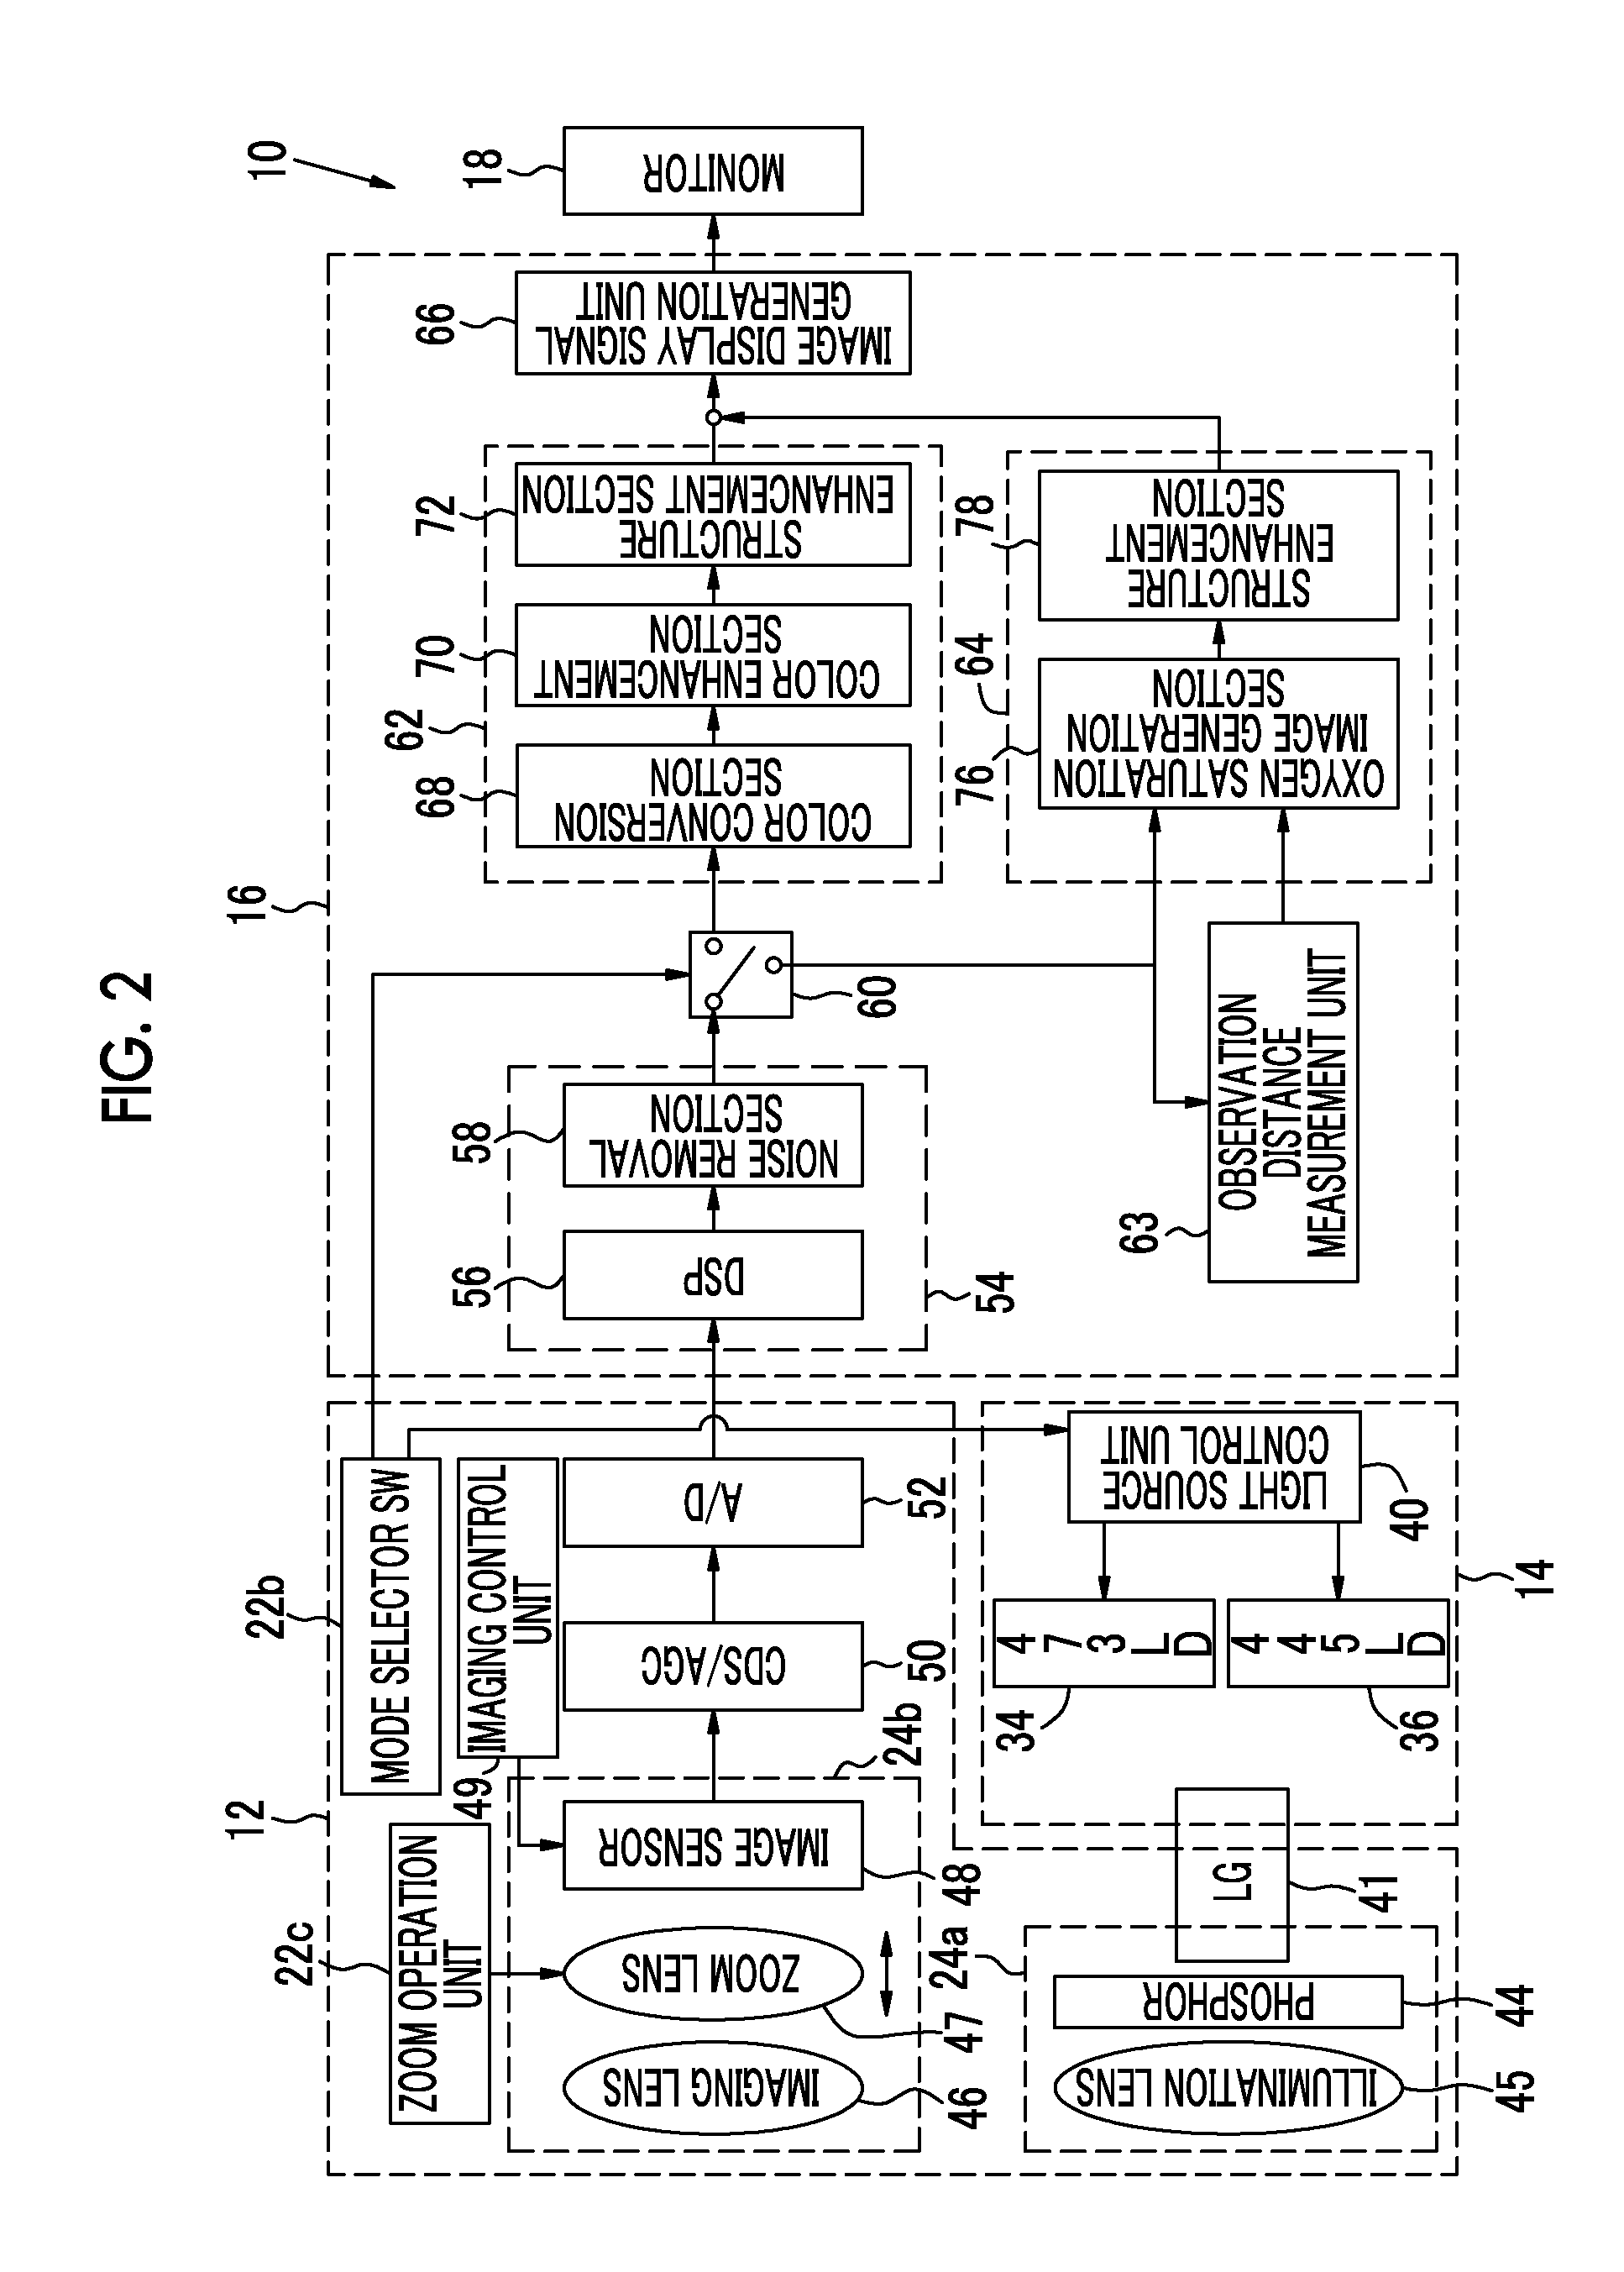 Endoscope system, processor device, operation method, and distance measurement device